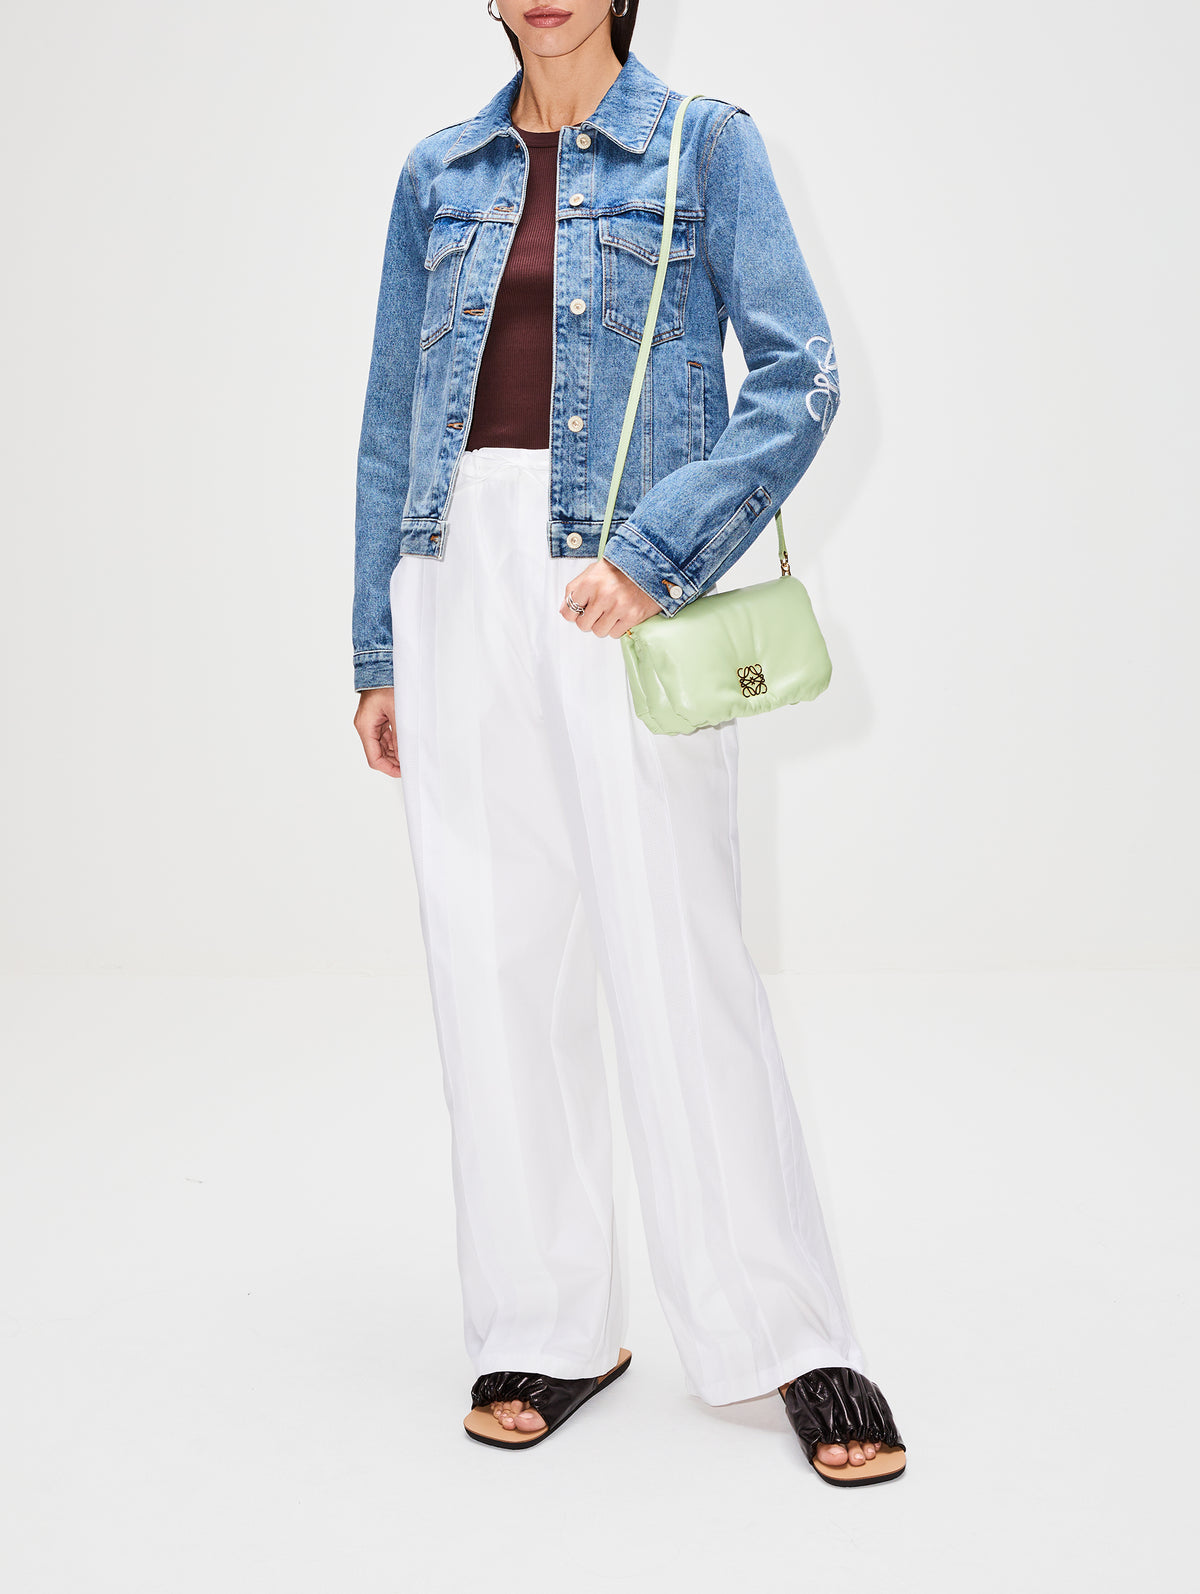 Loewe Goya Puffer Bag outfit inspo for your summer #fobe #outfitinspo